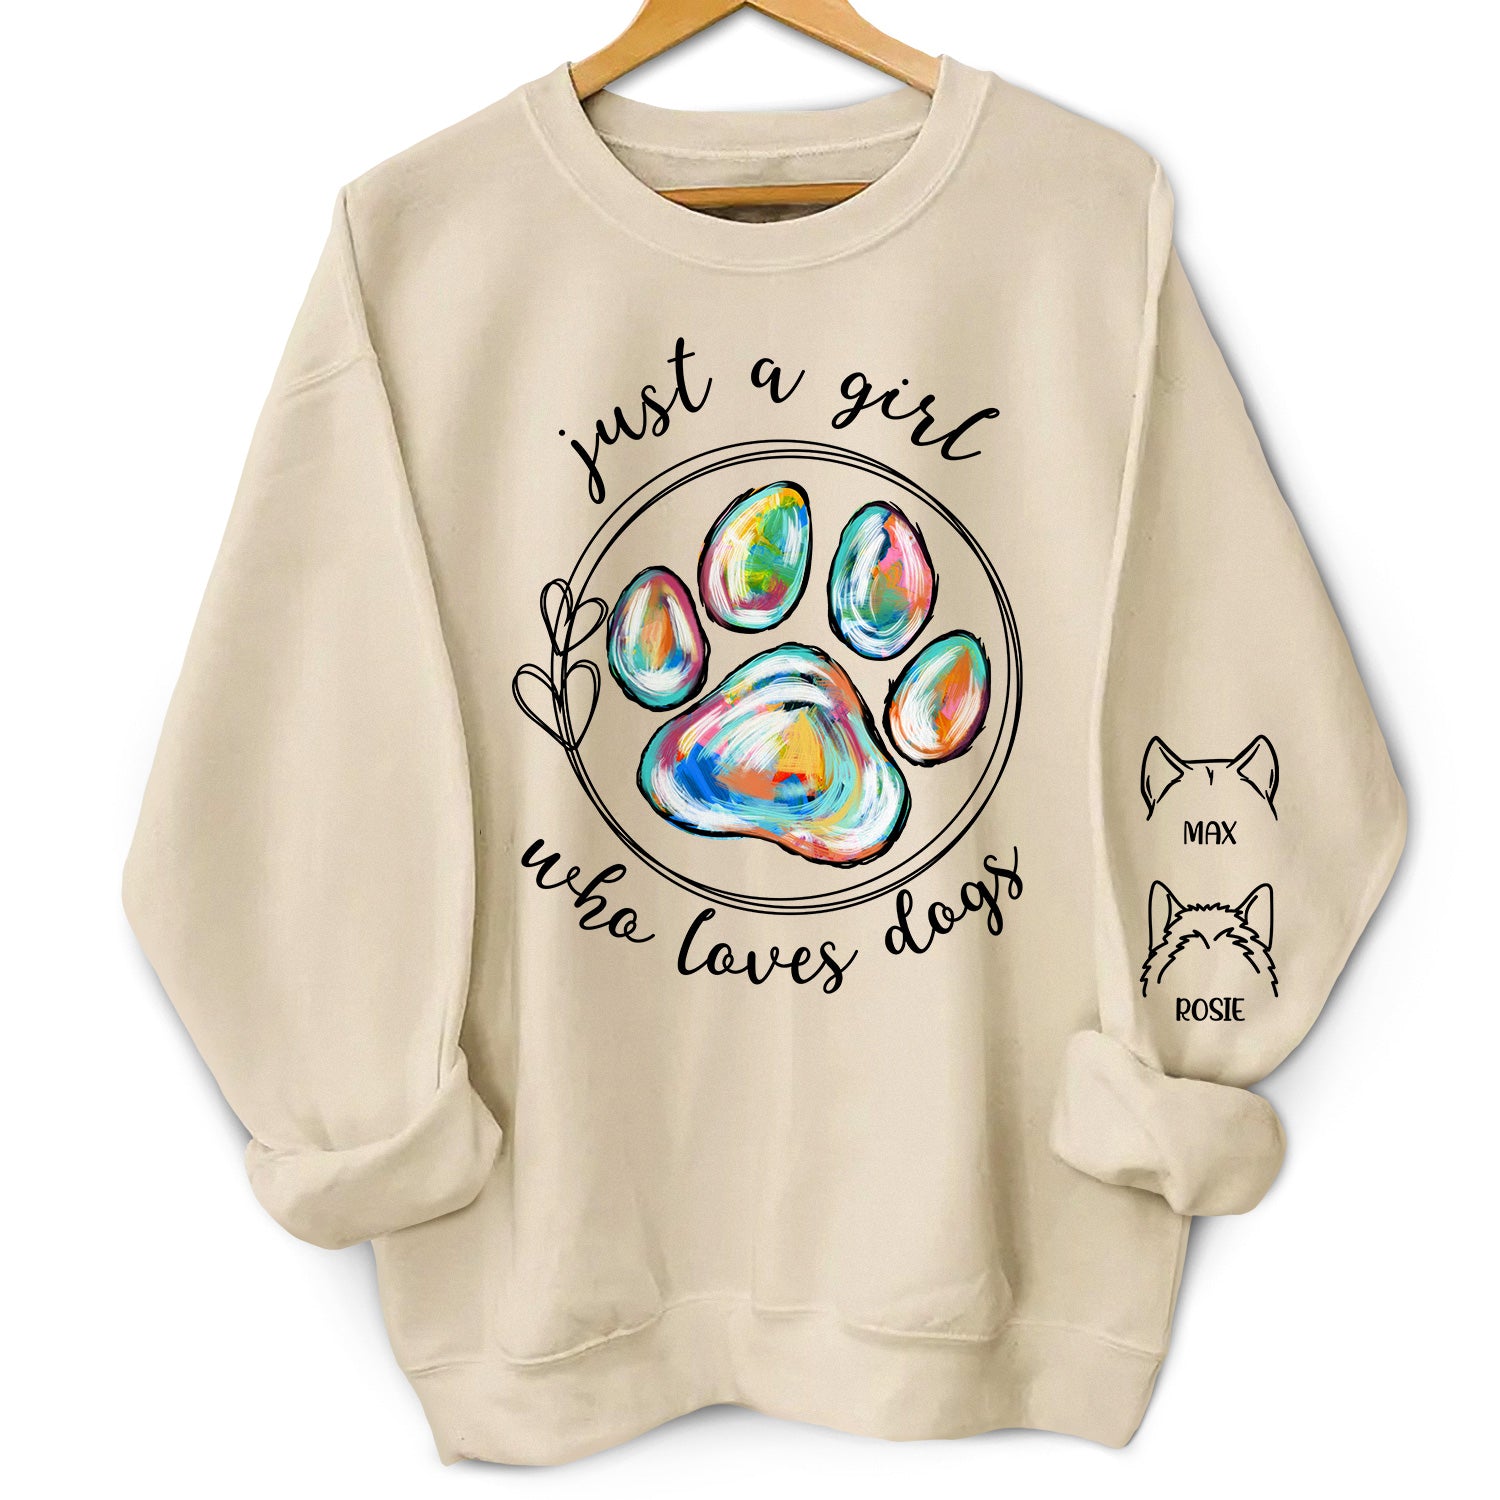 Just A Girl Who Loves Dogs Cats - Birthday, Loving Gift For Dog Lover, Cat Mom, Pet Mum - Personalized Unisex Sweatshirt With Design On Sleeve